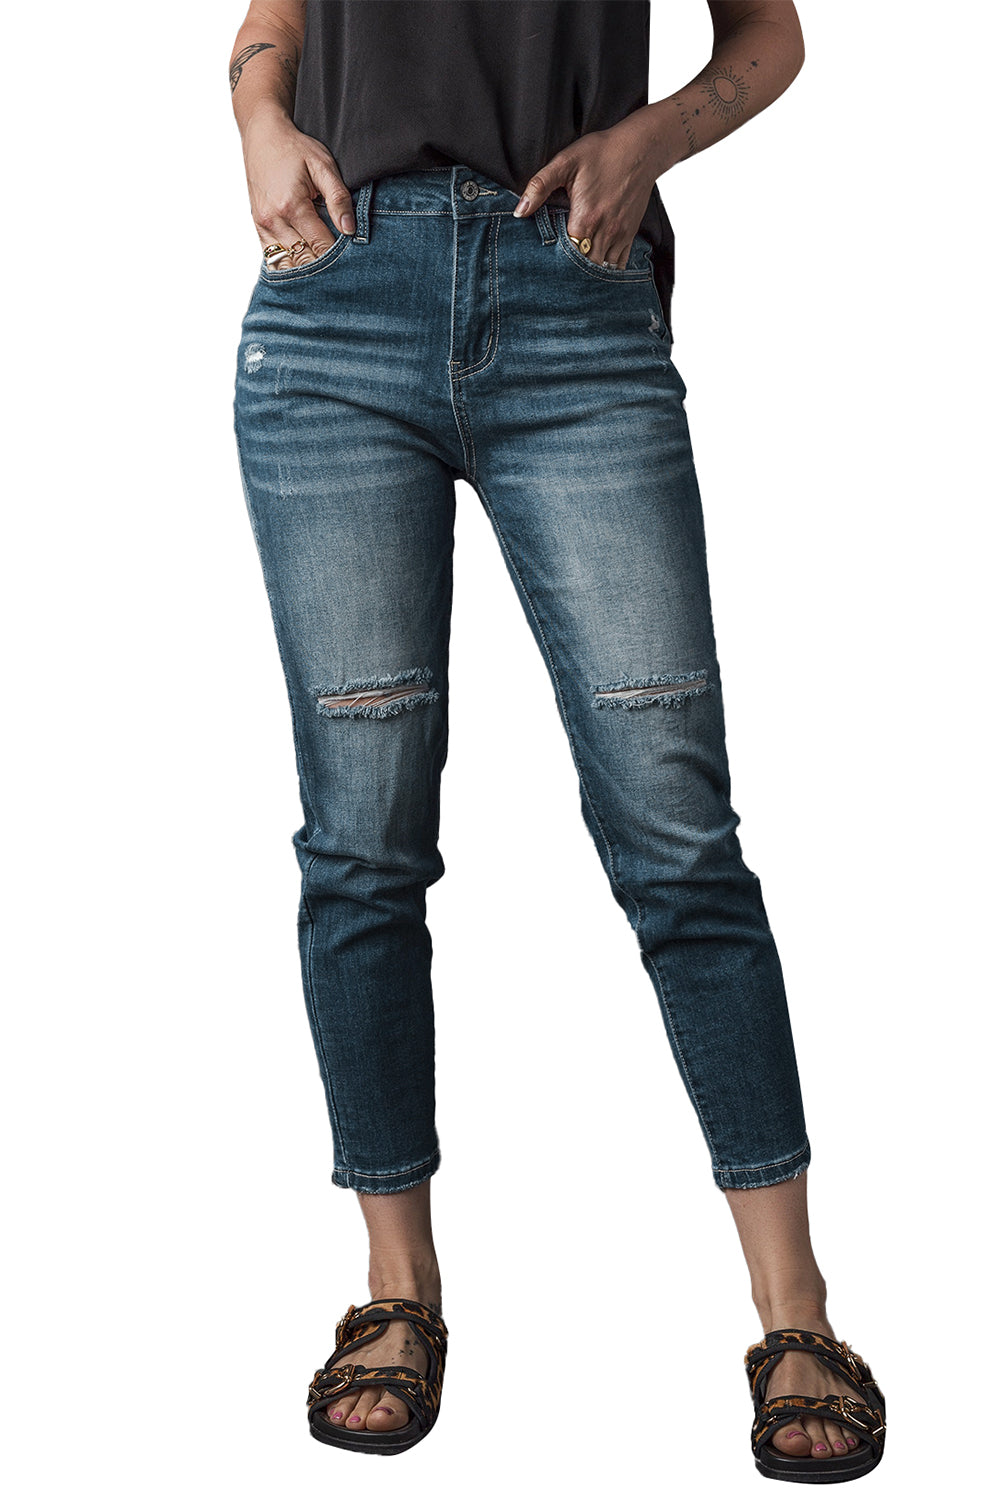 Blue Distressed Ripped Skinny Jeans - SELFTRITSS